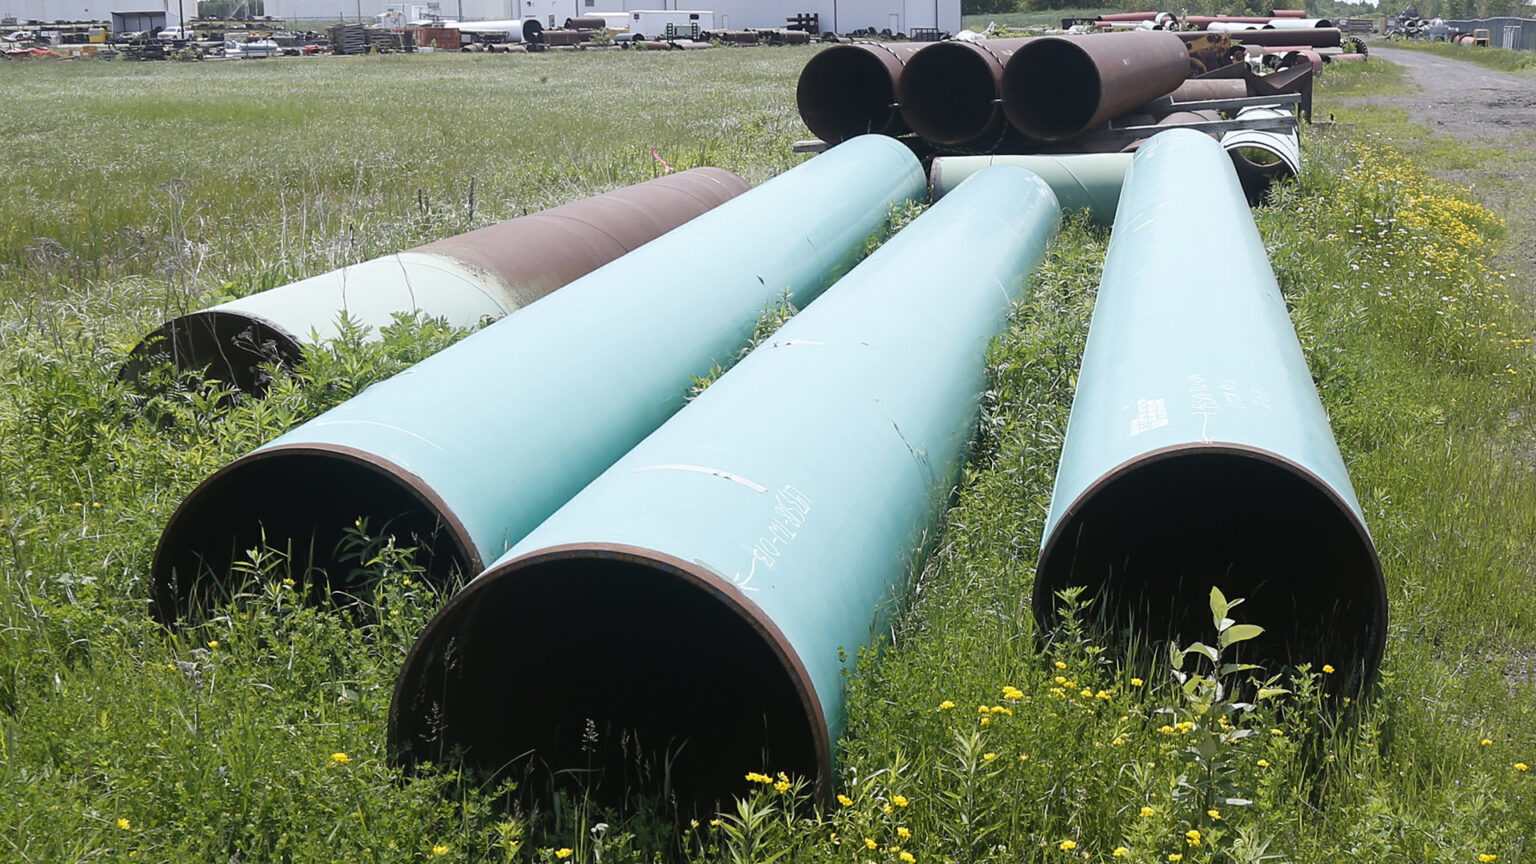 Multiple segments of a metal pipeline sit on an open field, with buildings and industrial equipment in the background.